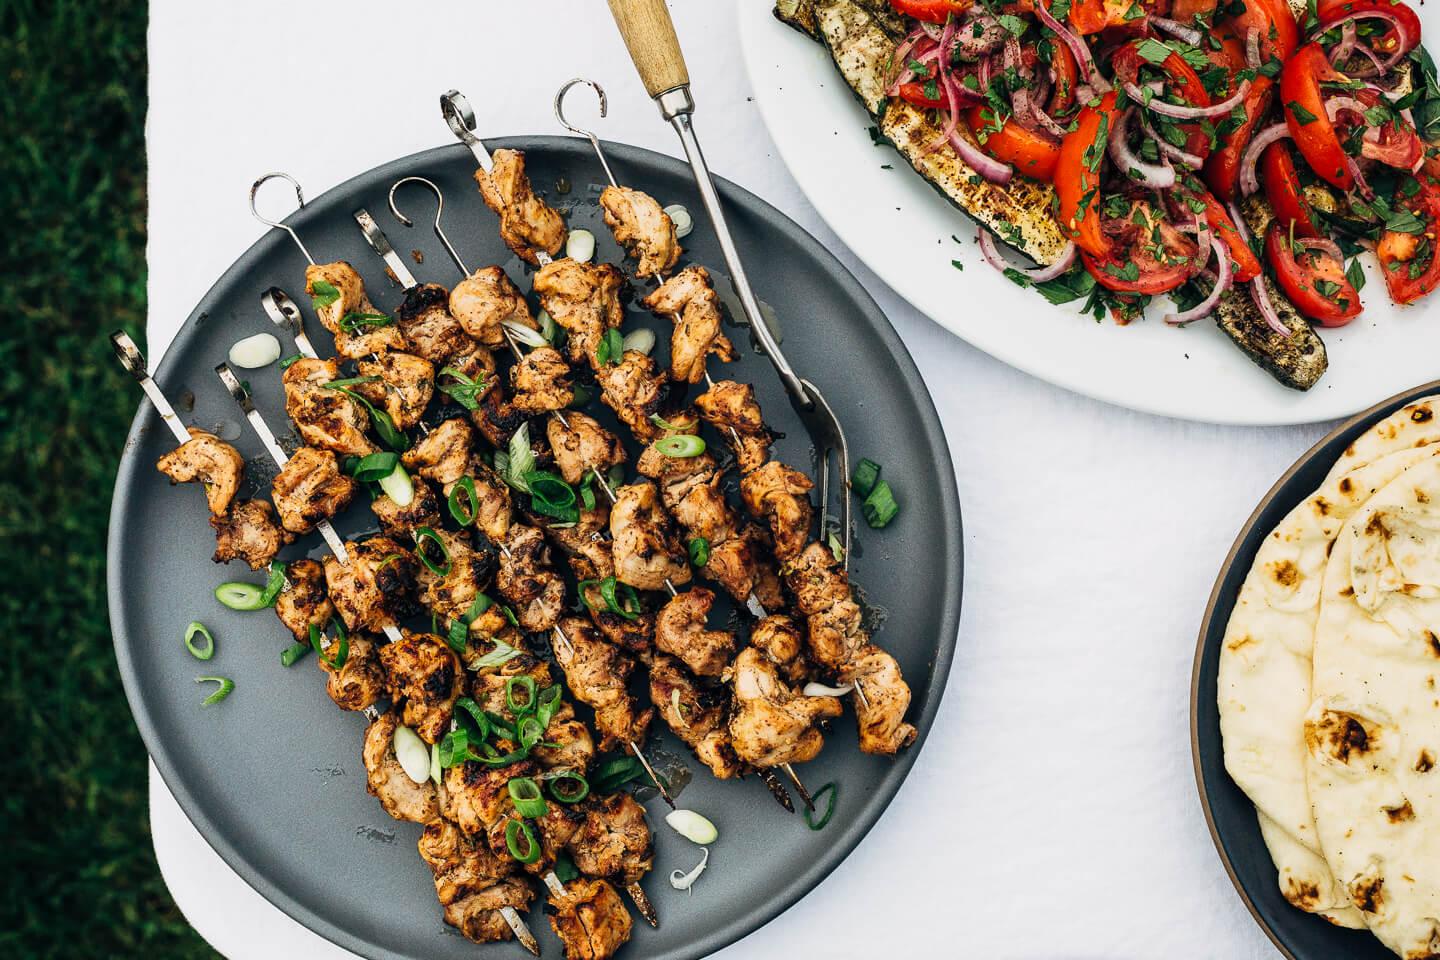 Deliciously tender lemon- and yogurt-marinated grilled chicken kebobs make for a vibrant summer cookout. The grilled chicken skewers are served alongside grilled flatbreads, tzatziki, and an herbed salad made with grilled zucchini, tomato, and red onion.